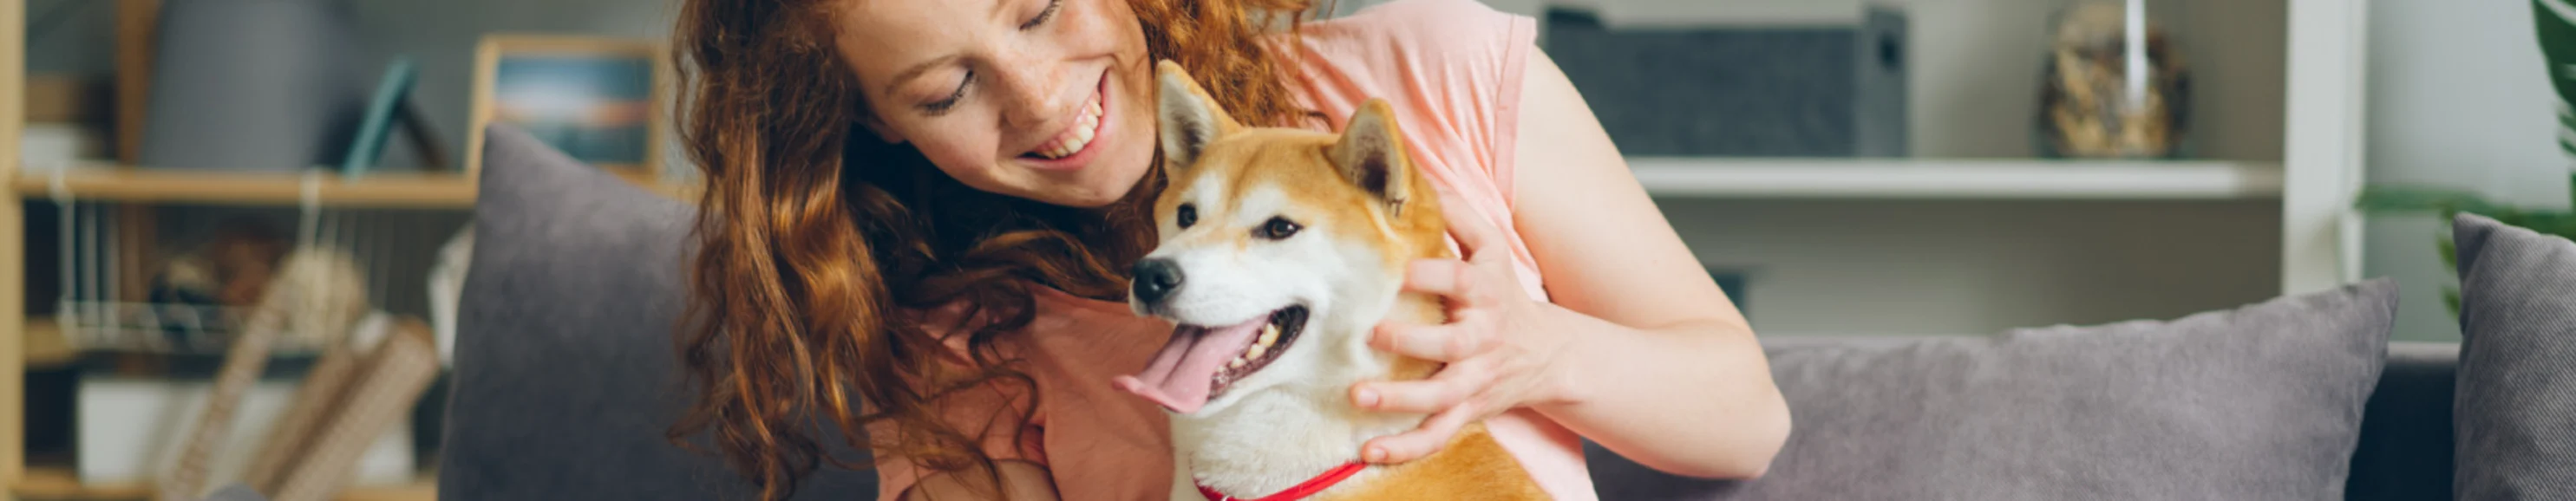 Woman playing with shiba inu dog on couch